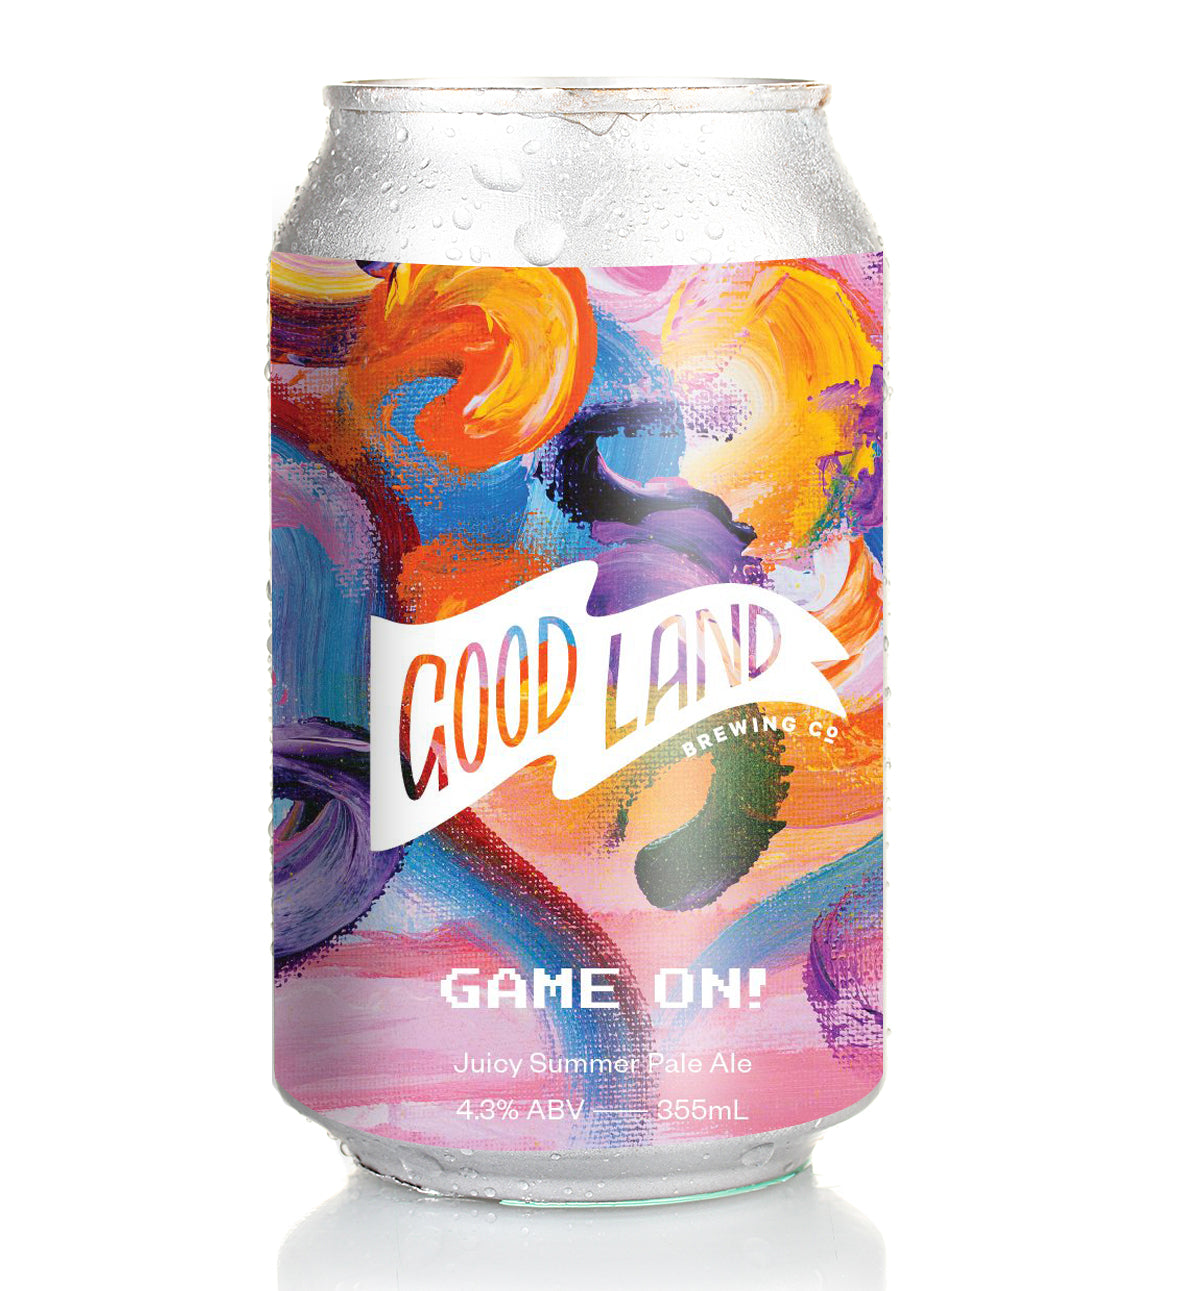 Good Land Brewing "Game On" Hazy Pale Ale (24) Media 1 of 1